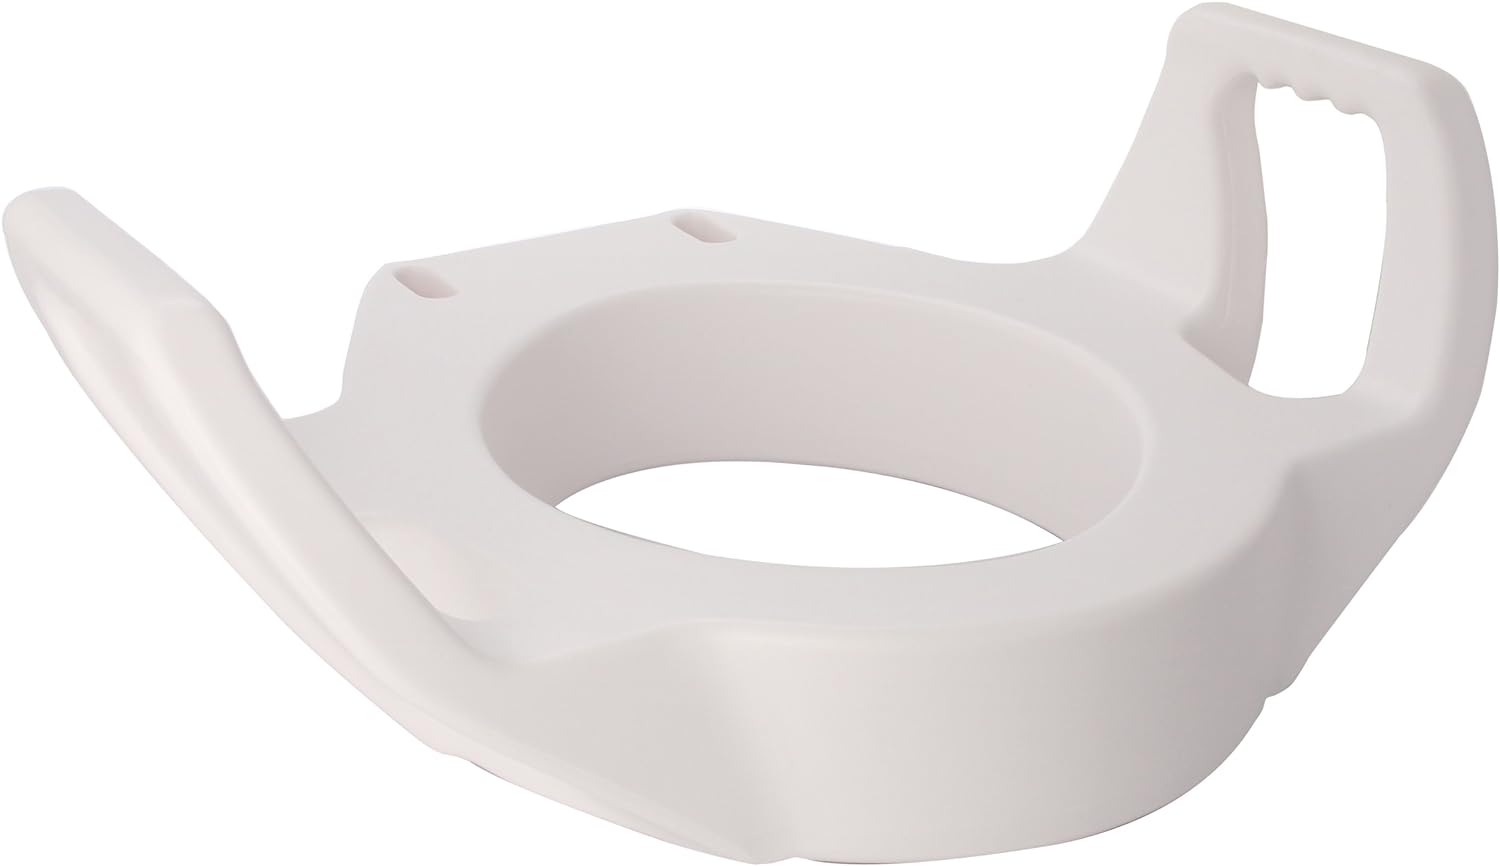 Generic SP Ableware Maddak Bath Safe Elevated Toilet Seat with Arm (725753211), 3-1/2" Standard